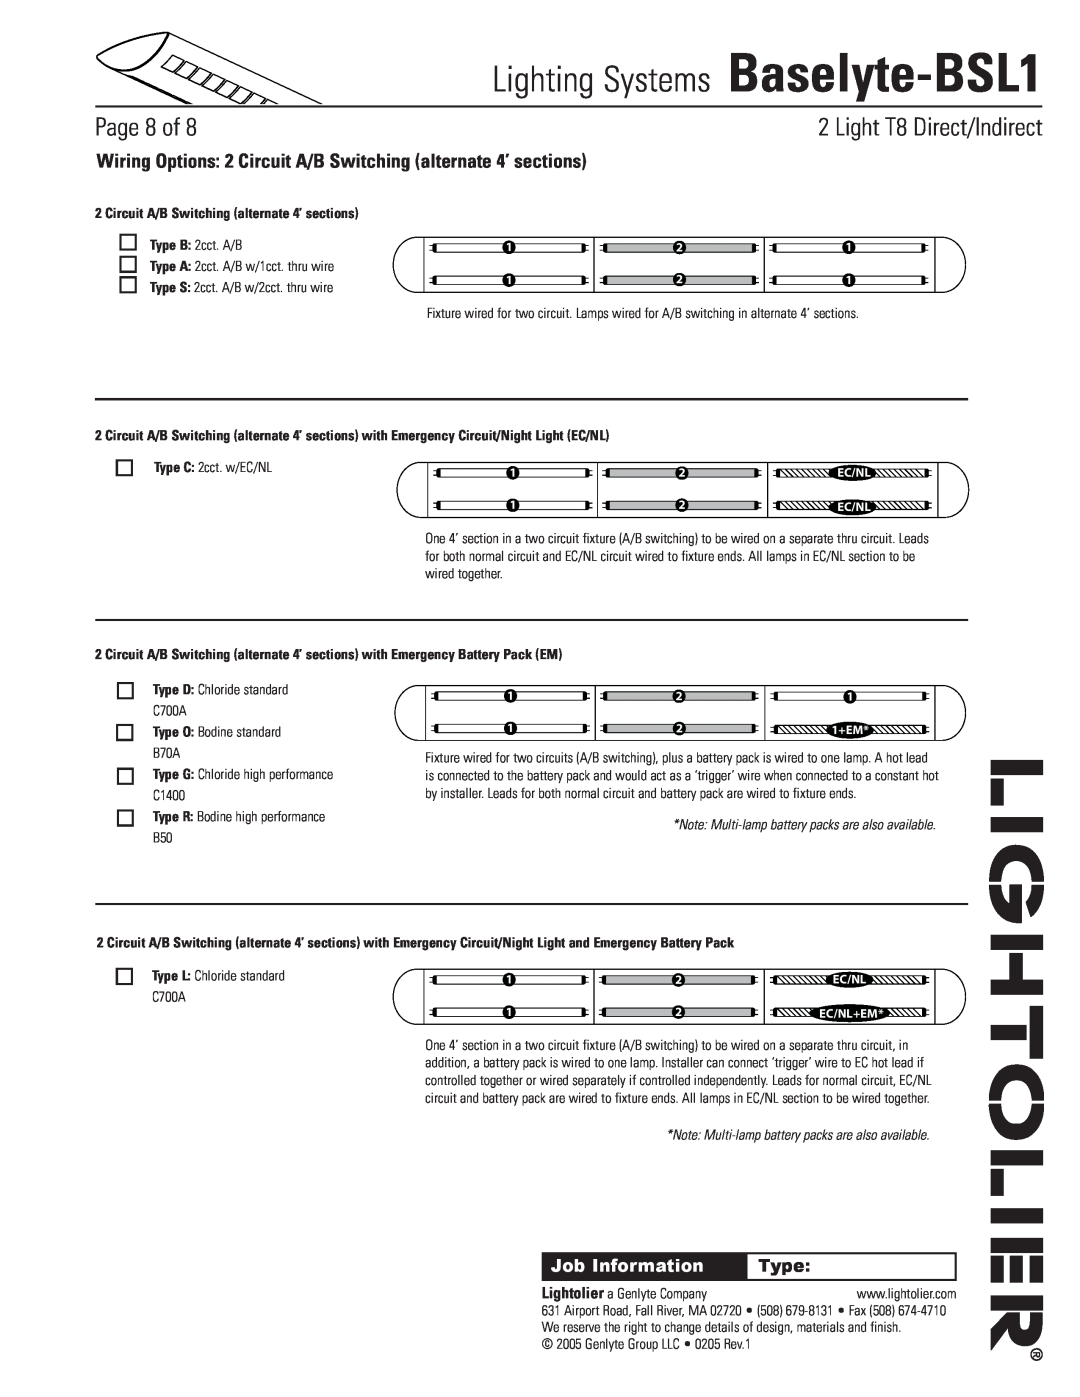 Lightolier Baselyte-BSL1 specifications Circuit A/B Switching alternate 4’ sections, Type O Bodine standard B70A, Page of 